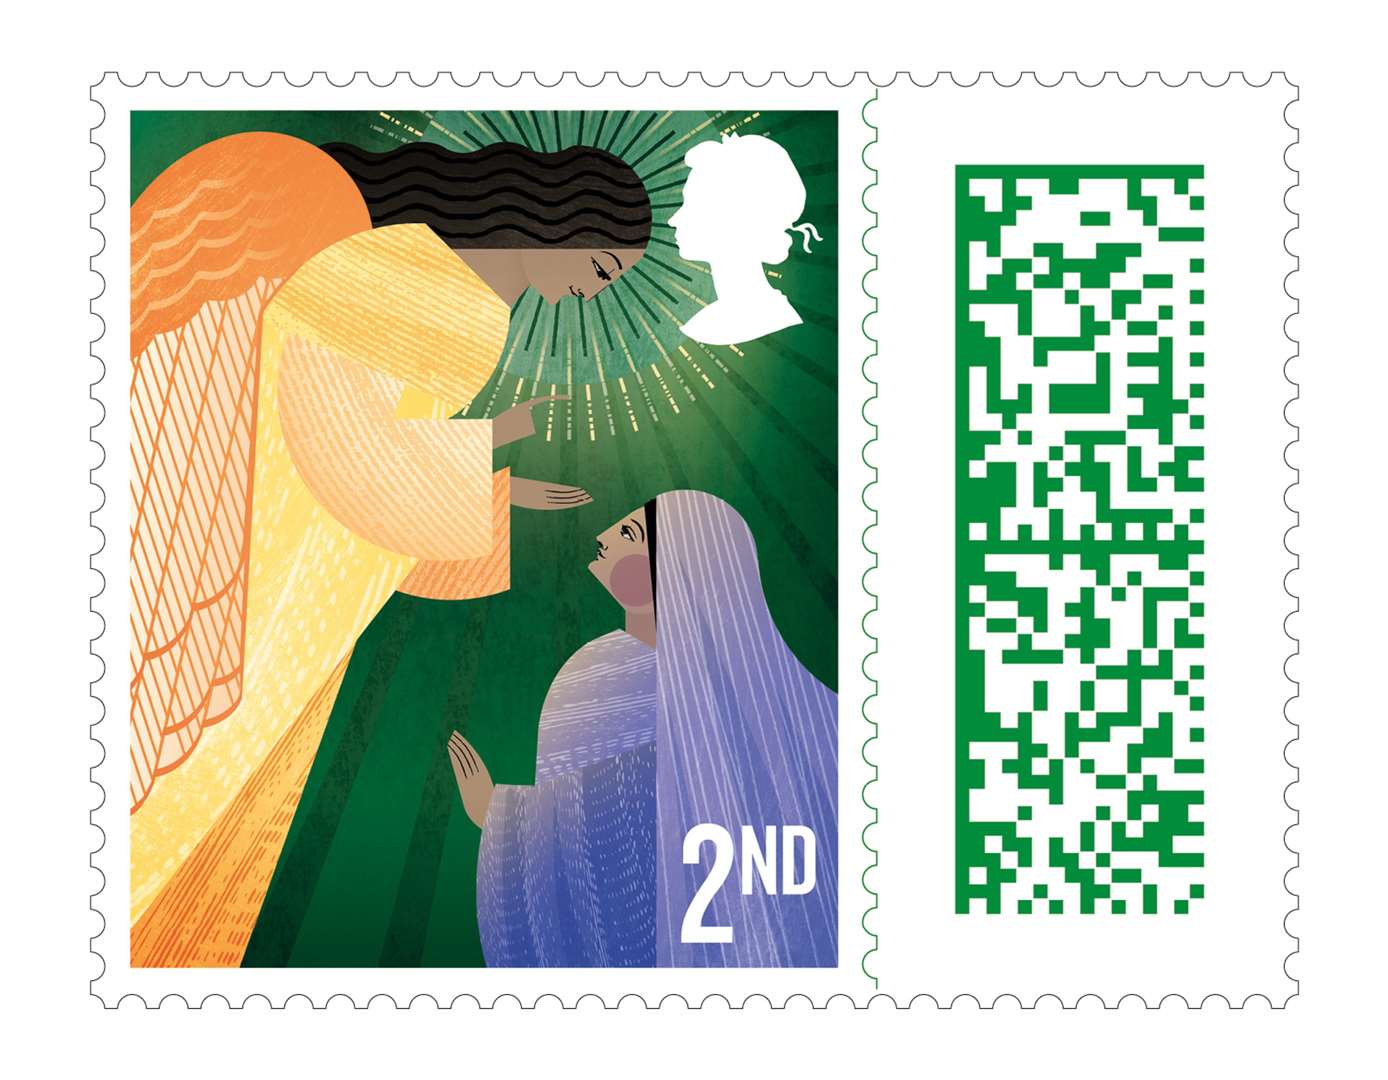 They are the last Christmas stamps to feature the Queen's silhouette